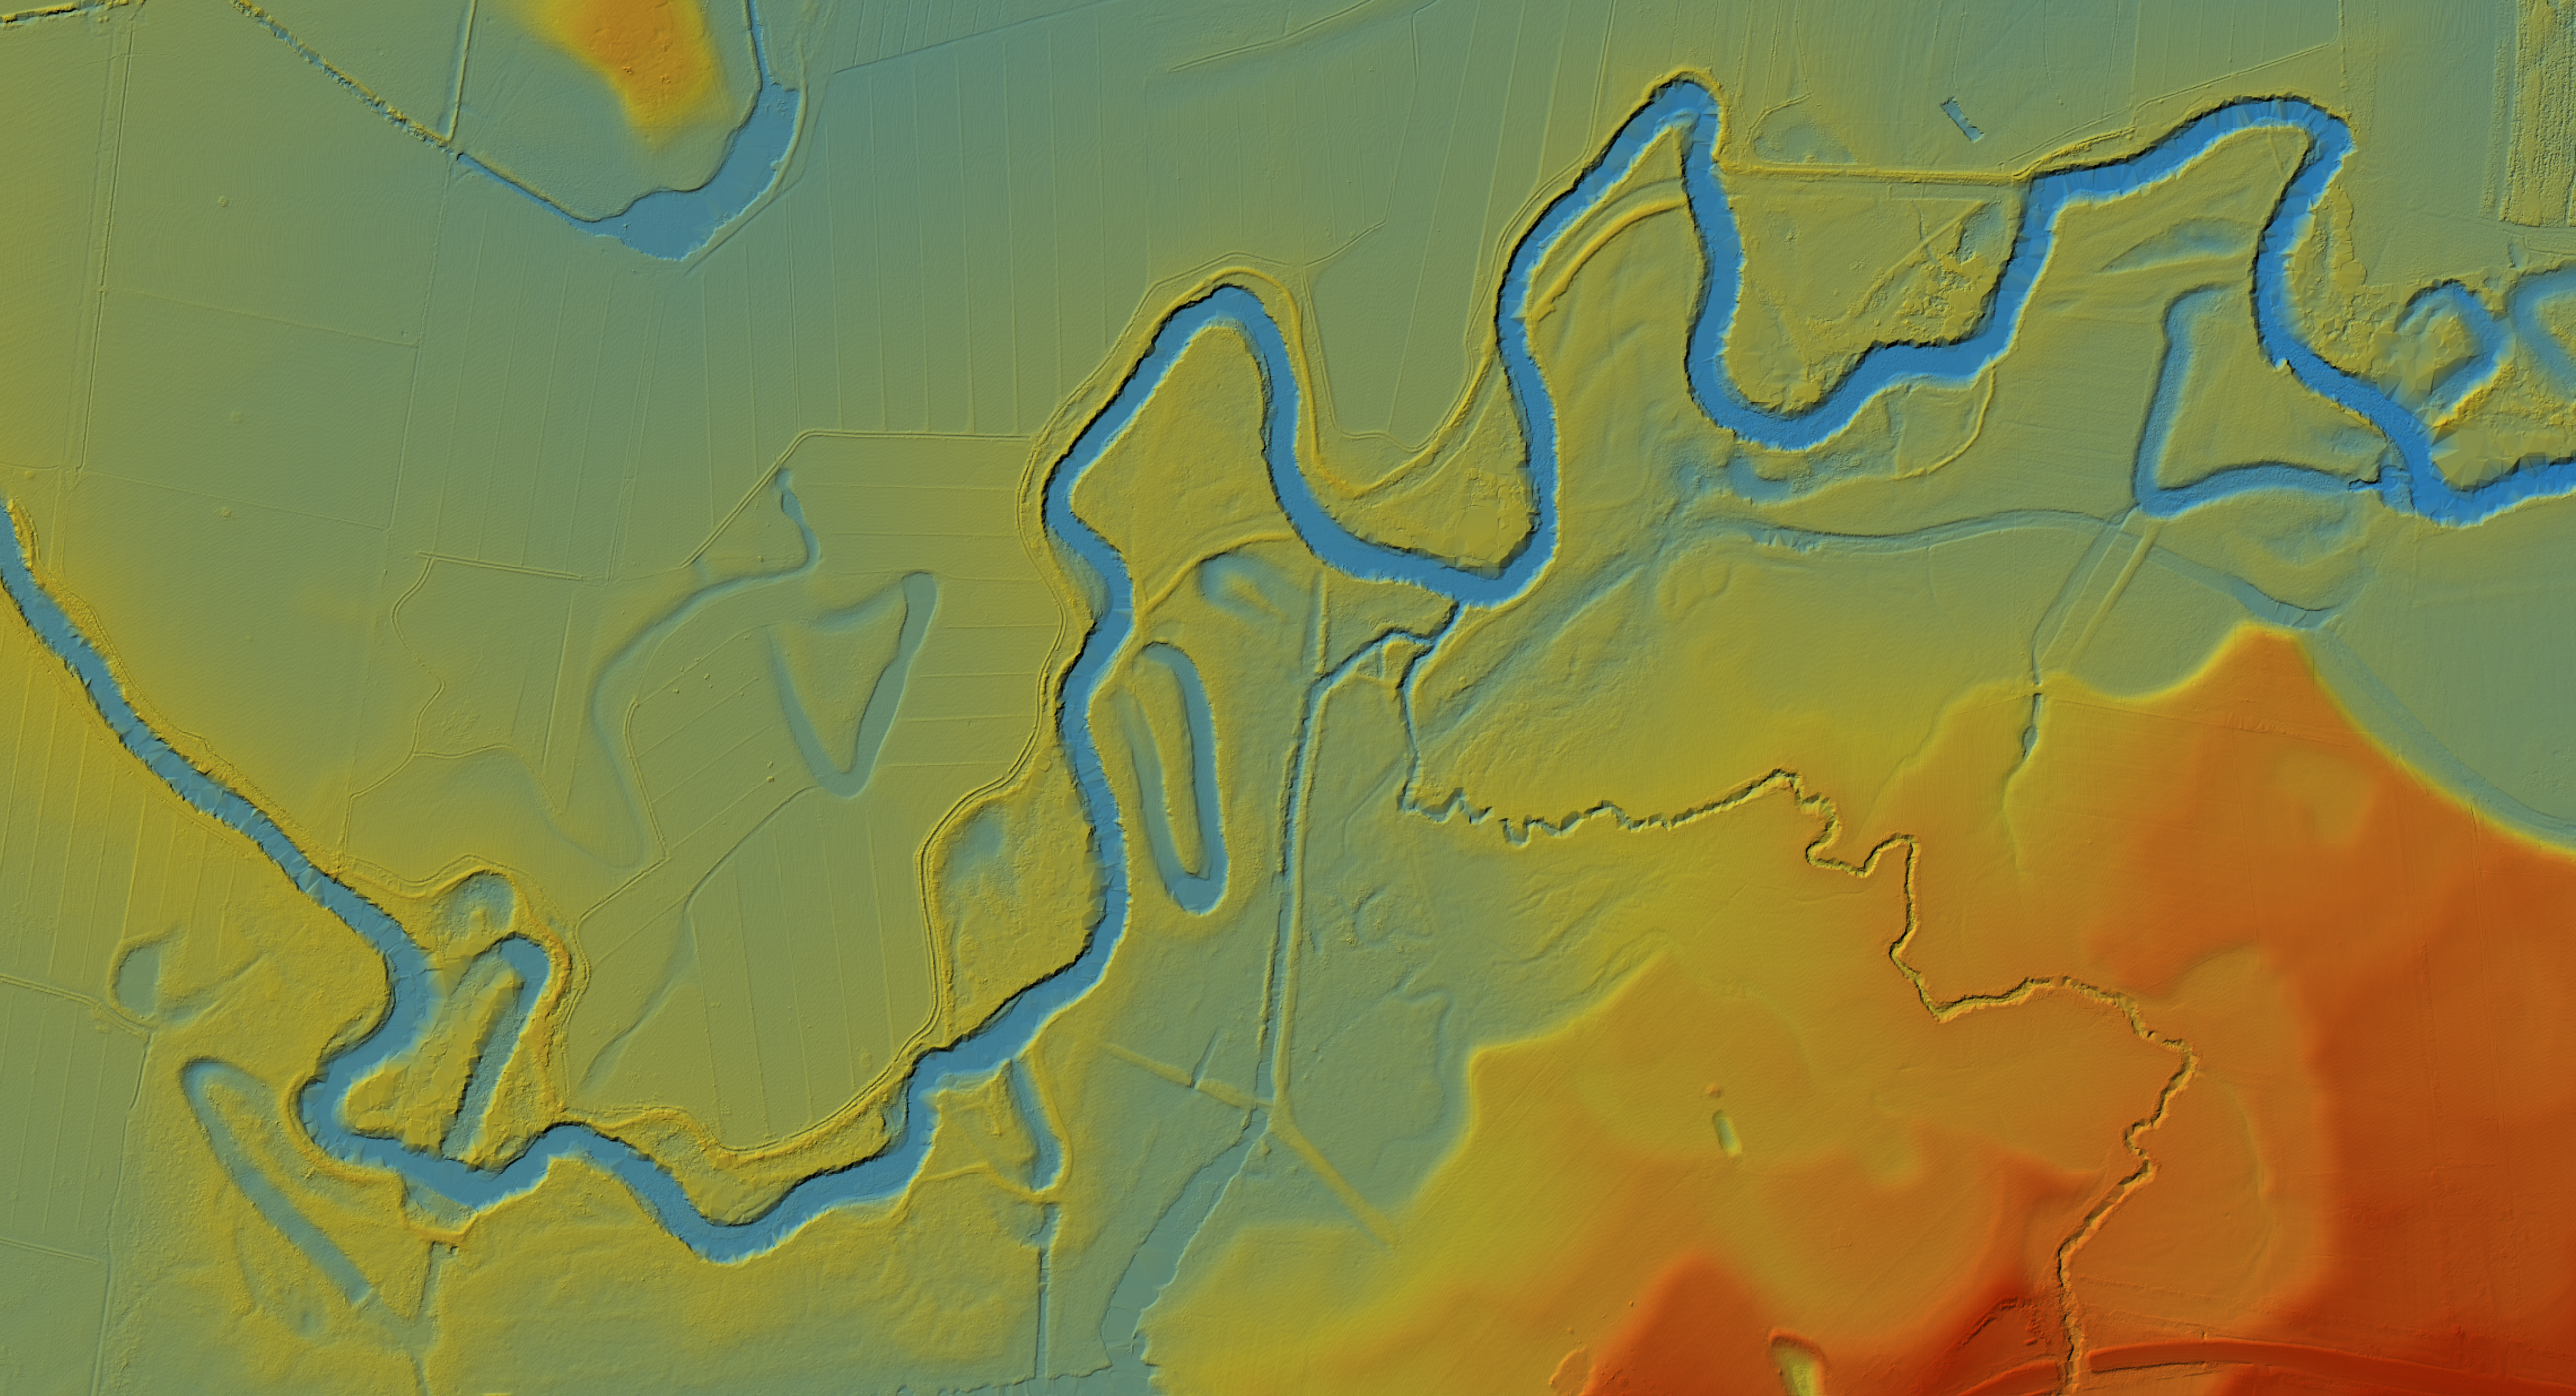 LiDAR aerial imagery over a section of river near Latrobe. Colour represents height, with the deeper points such as river bends and flood plains shaded in blues, the fields shaded in teals, greens and yelows, and higher points suggesting hills in the bottom right corner shaded in oranges and reds.  